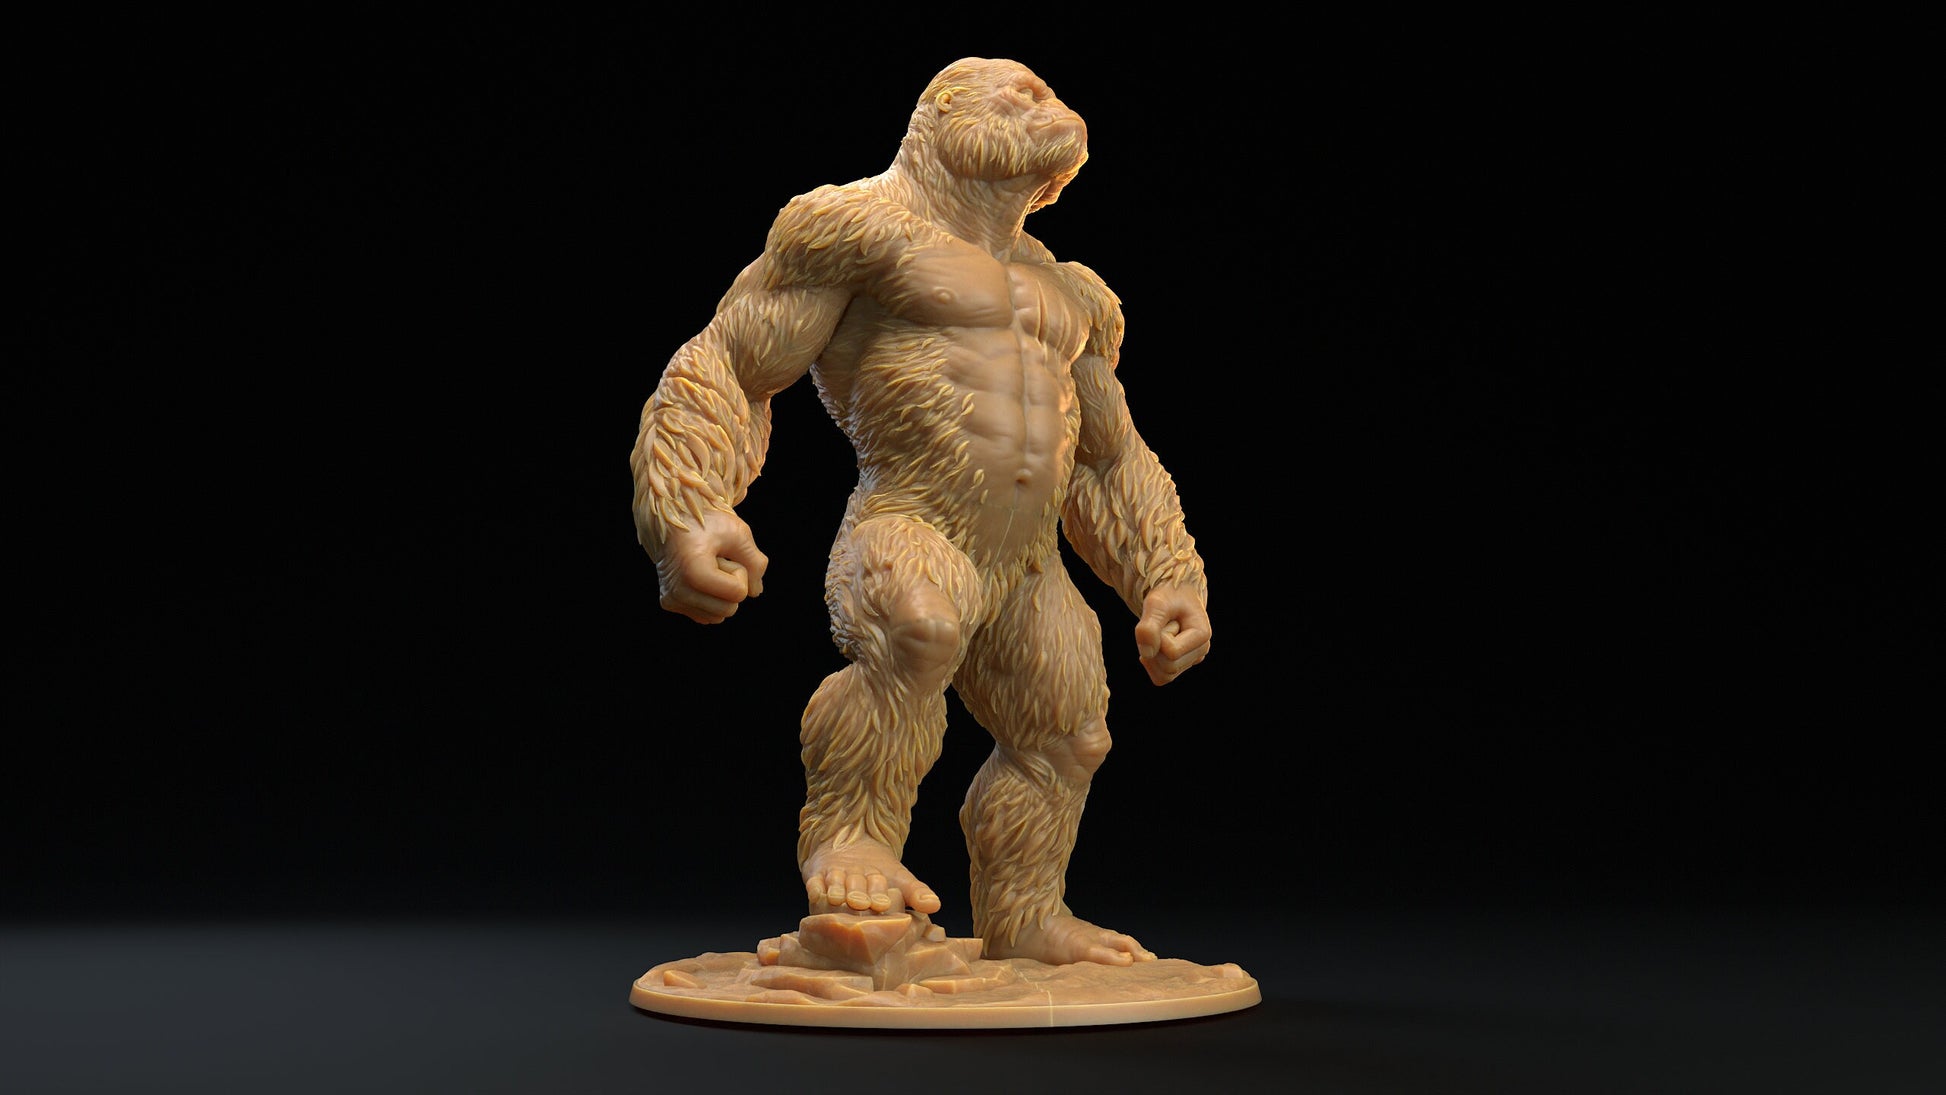 Khong | RPG Miniature for Dungeons and Dragons|Pathfinder|Tabletop Wargaming | Monster Miniature | Dragon Trappers Lodge